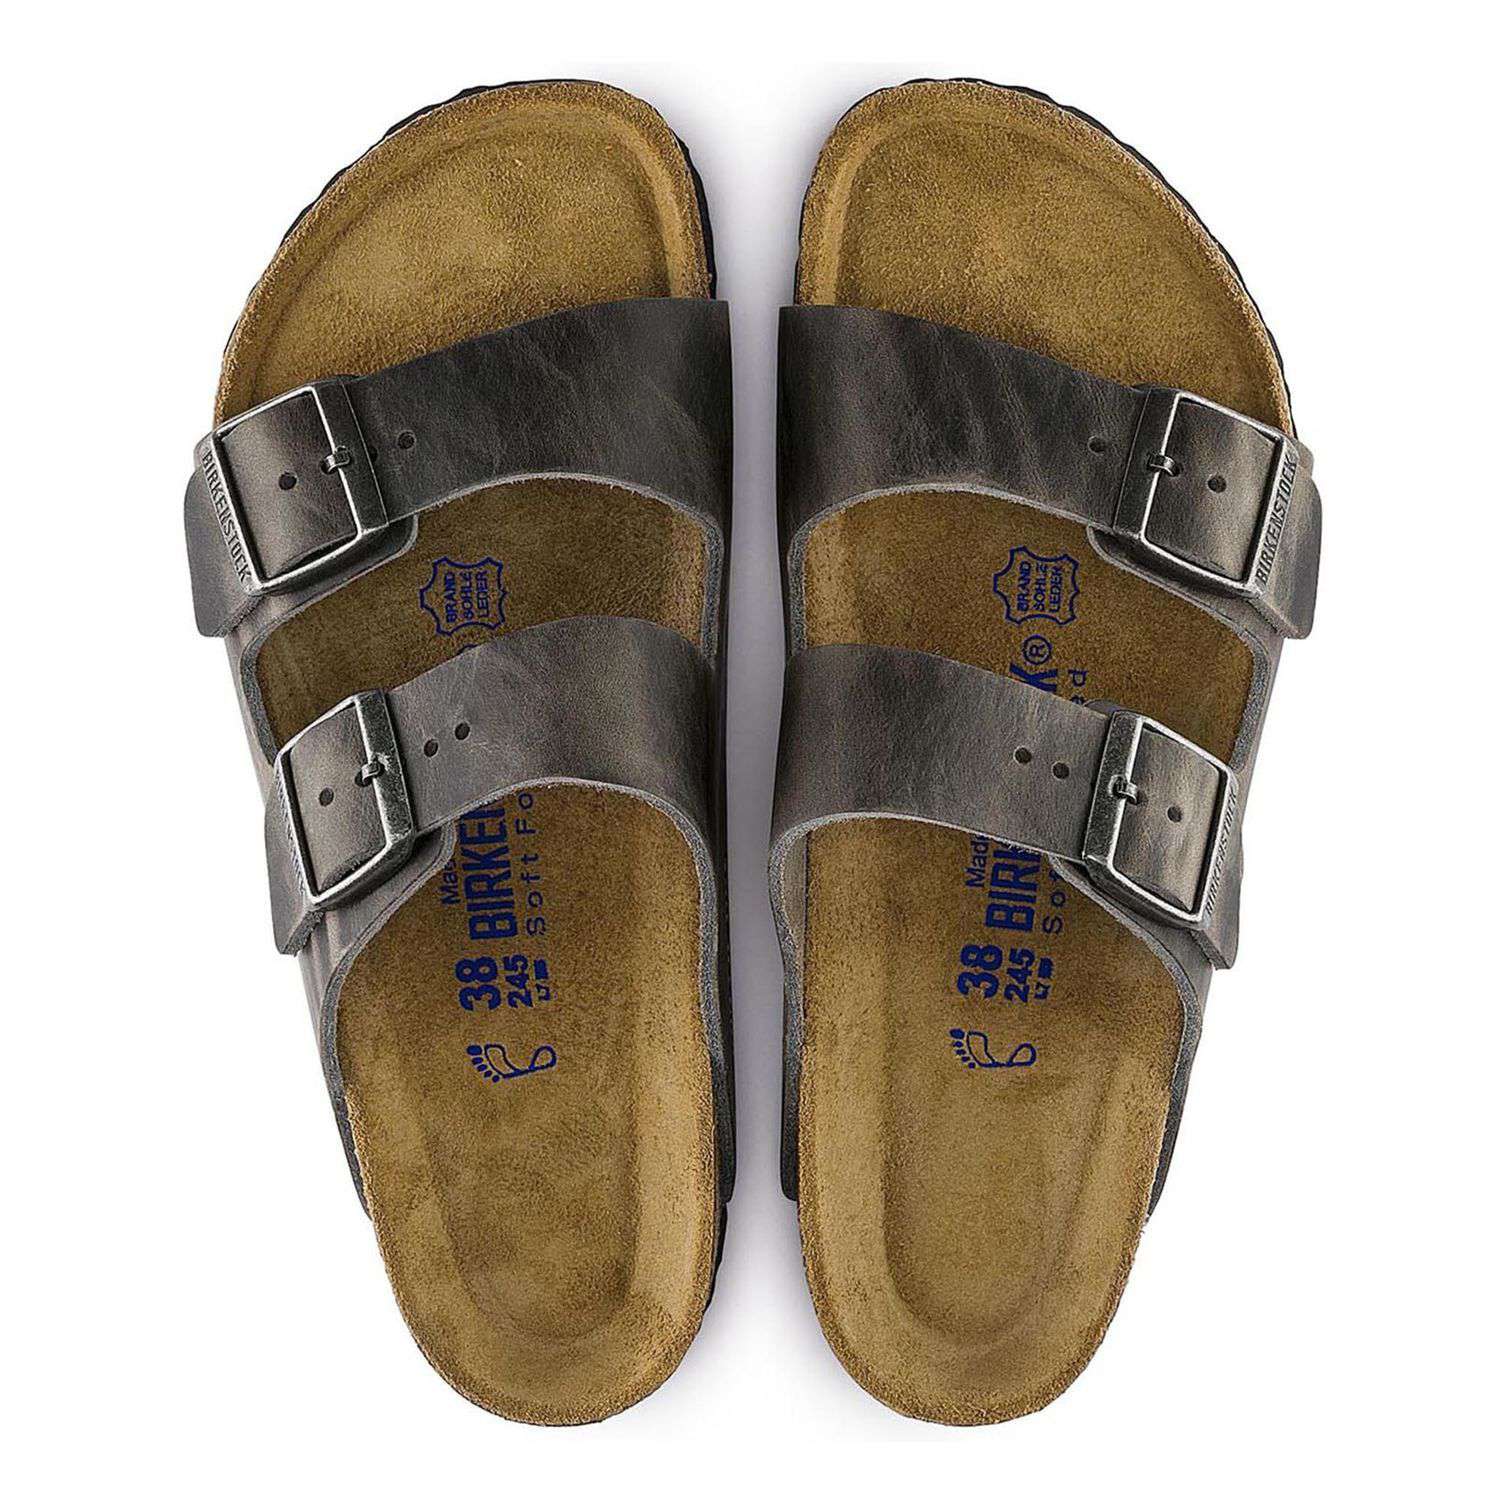 Birkenstock Women's Arizona Sandal in Oiled Iron Leather with Soft ...